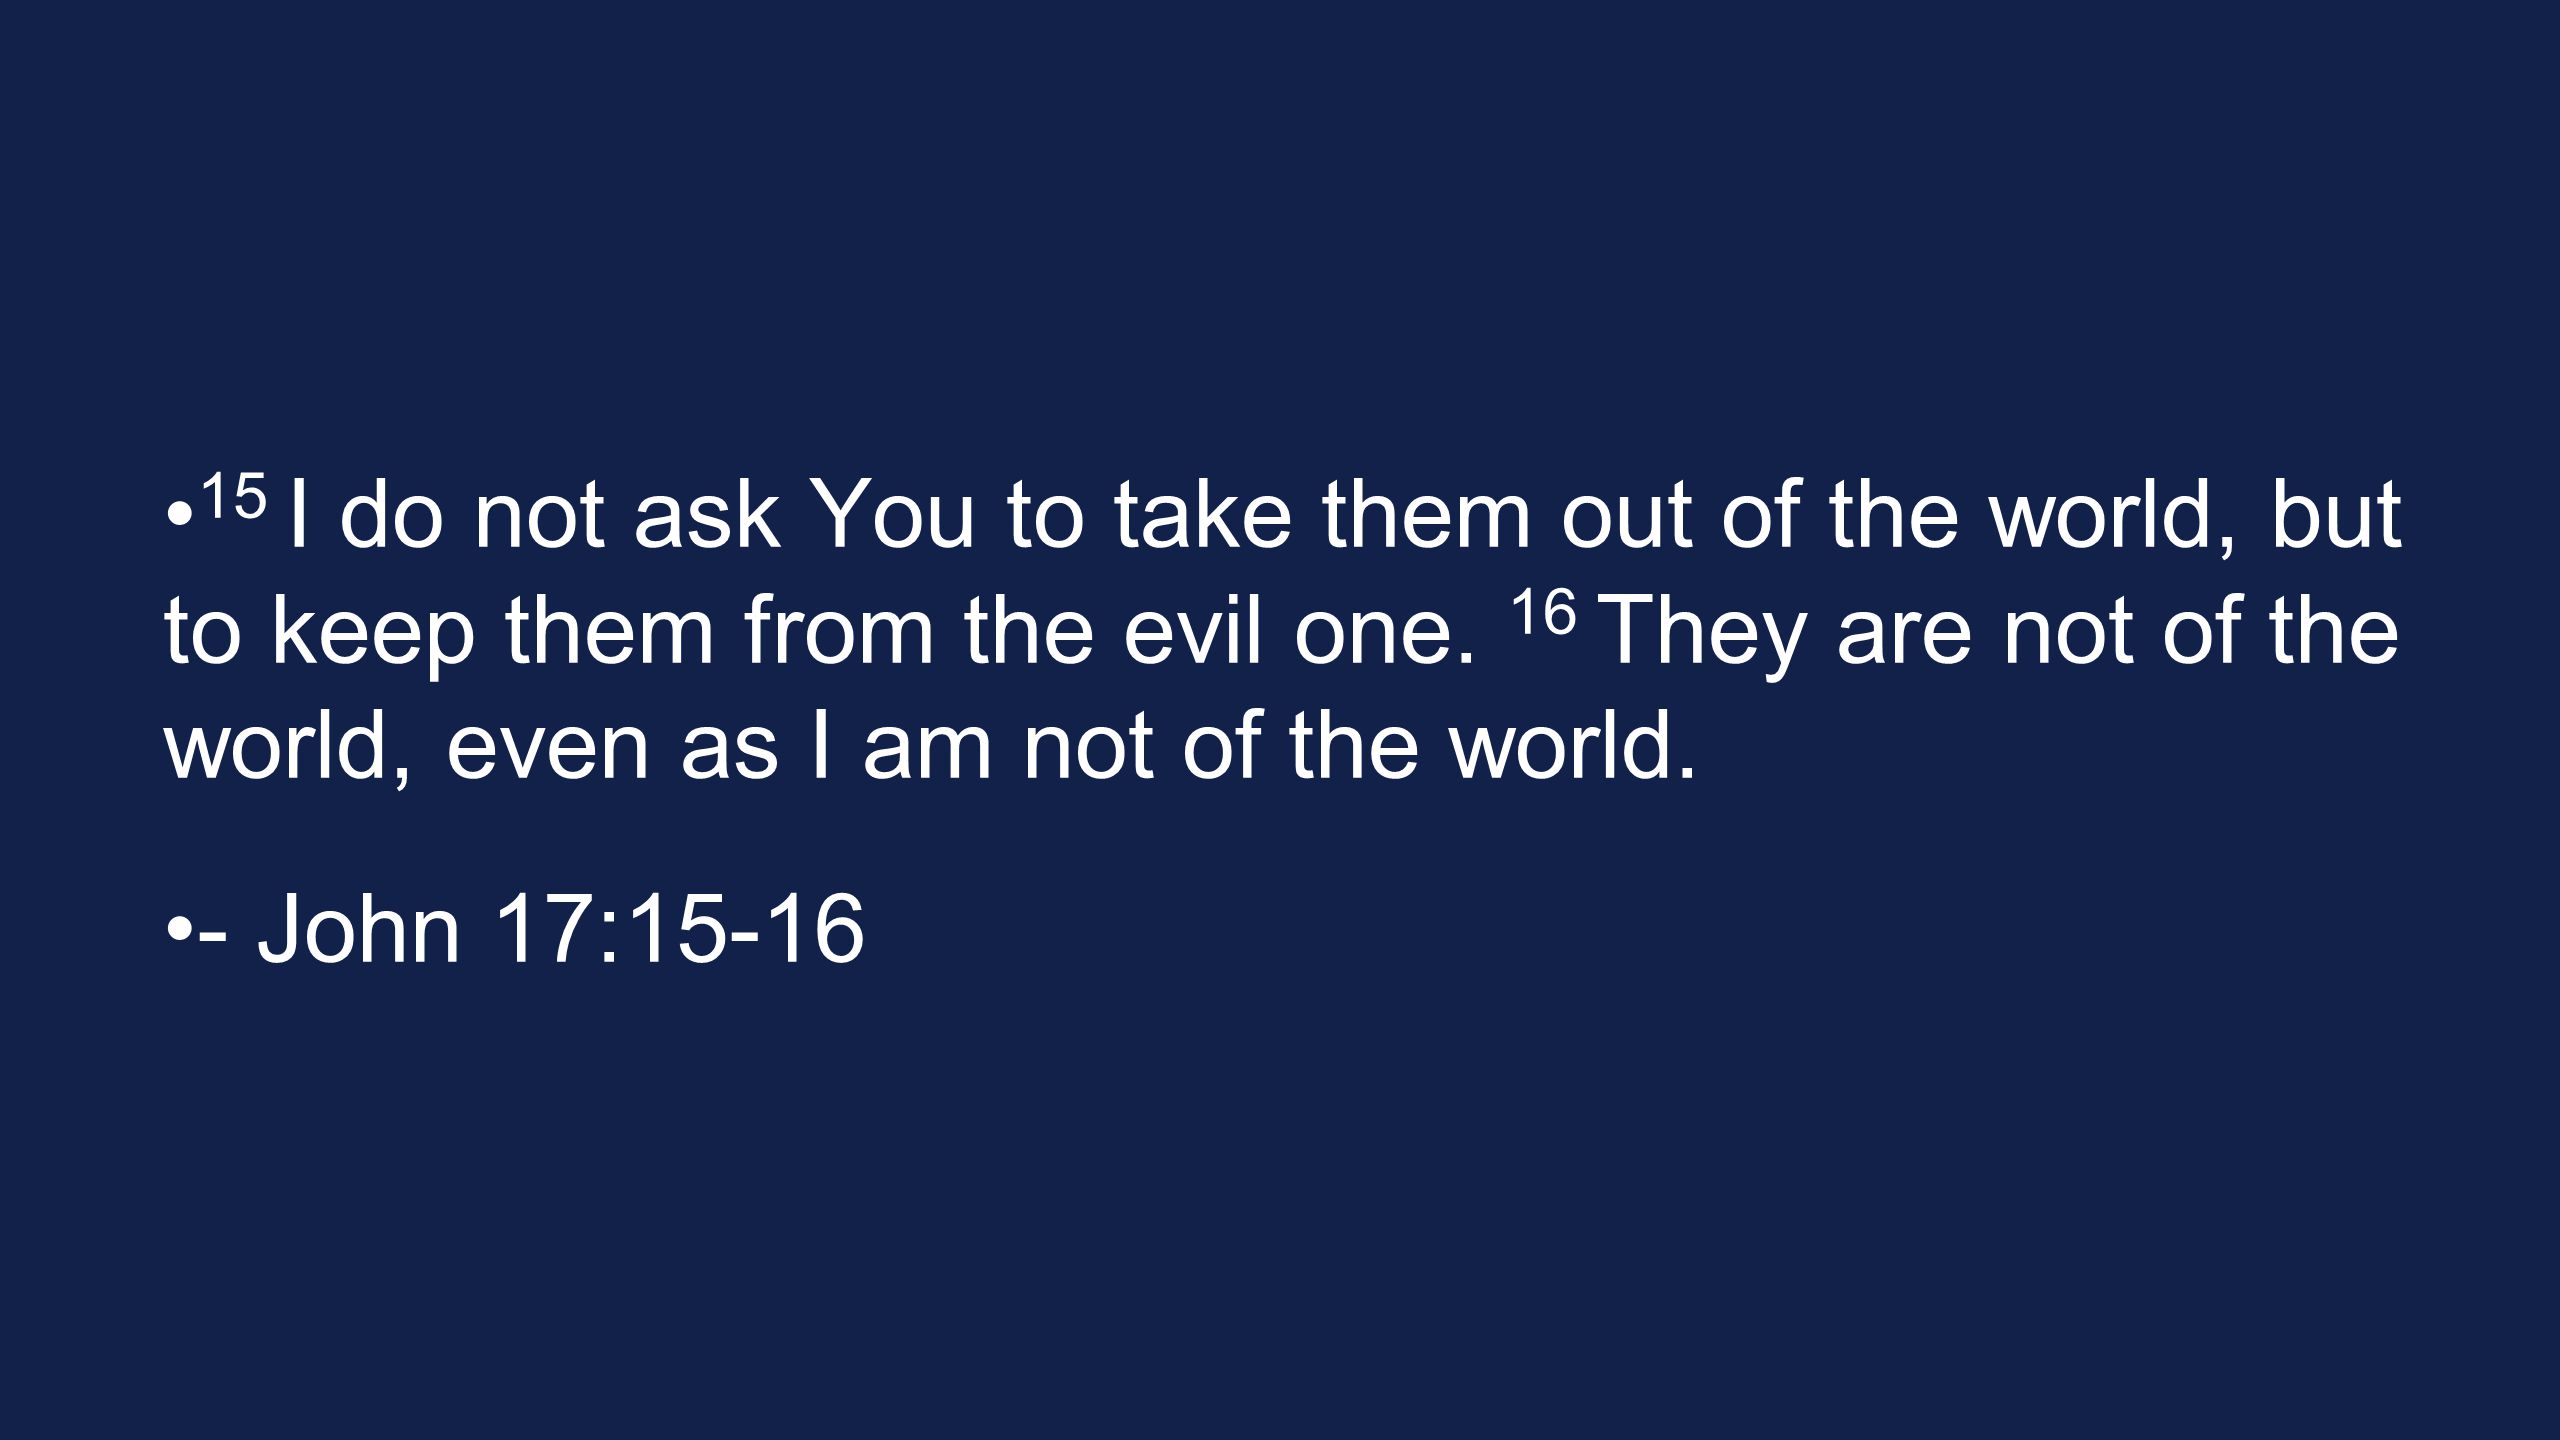 15 I do not ask You to take them out of the world, but to keep them from the evil one. 16 They are not of the world, even as I am not of the world.